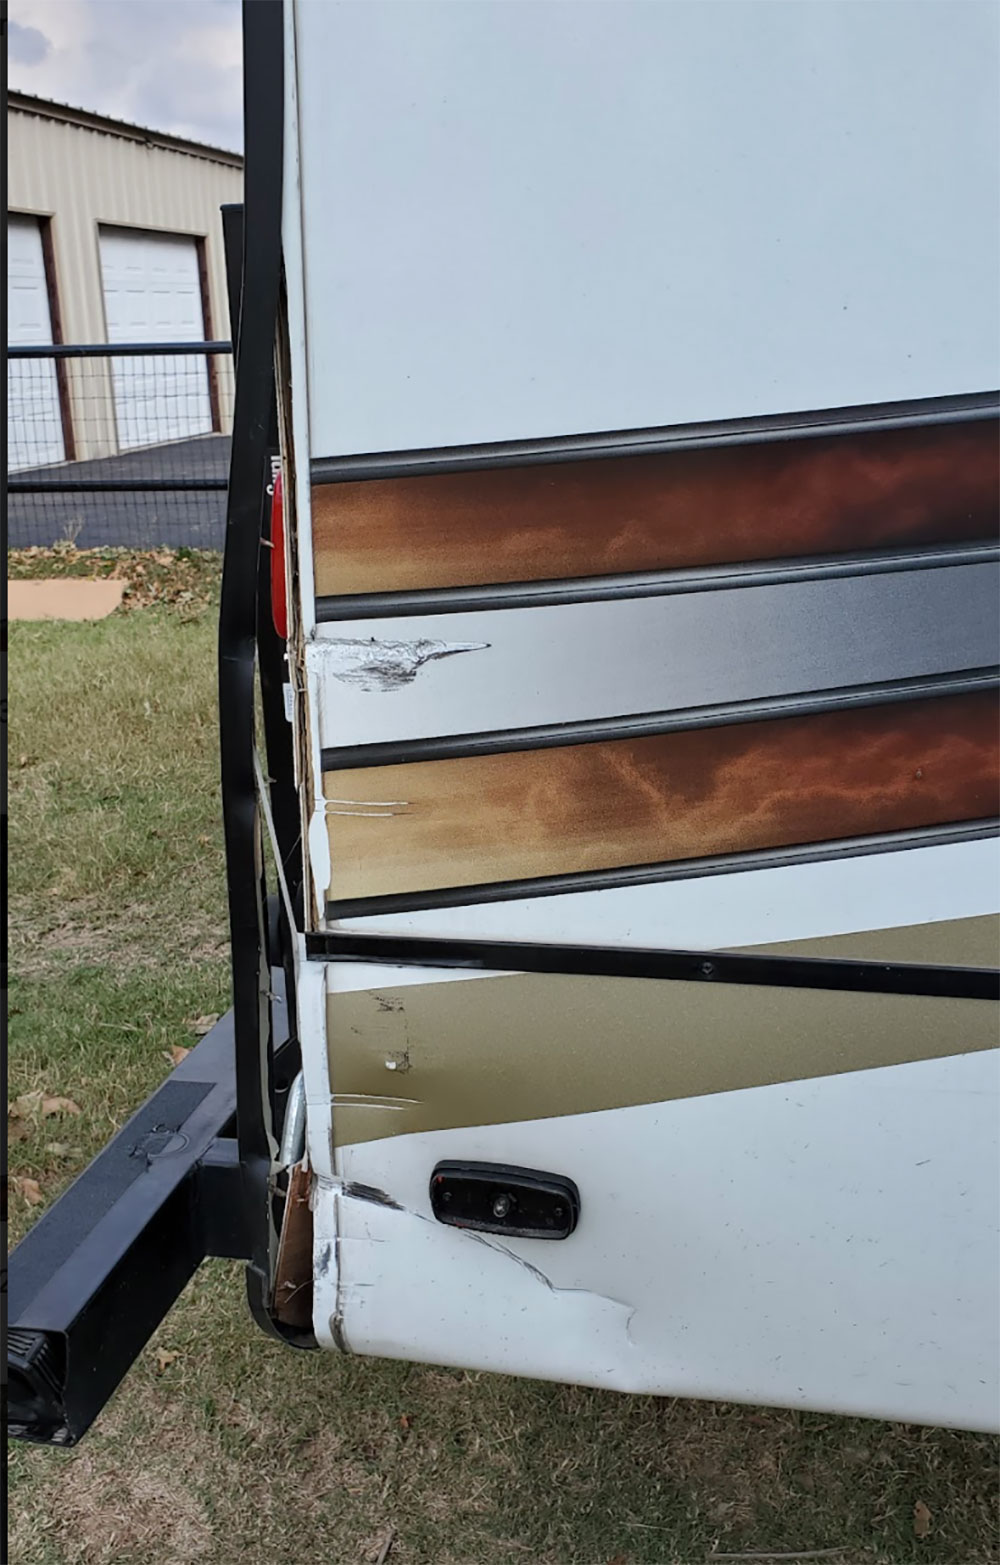 rv with rear corner damage from collision